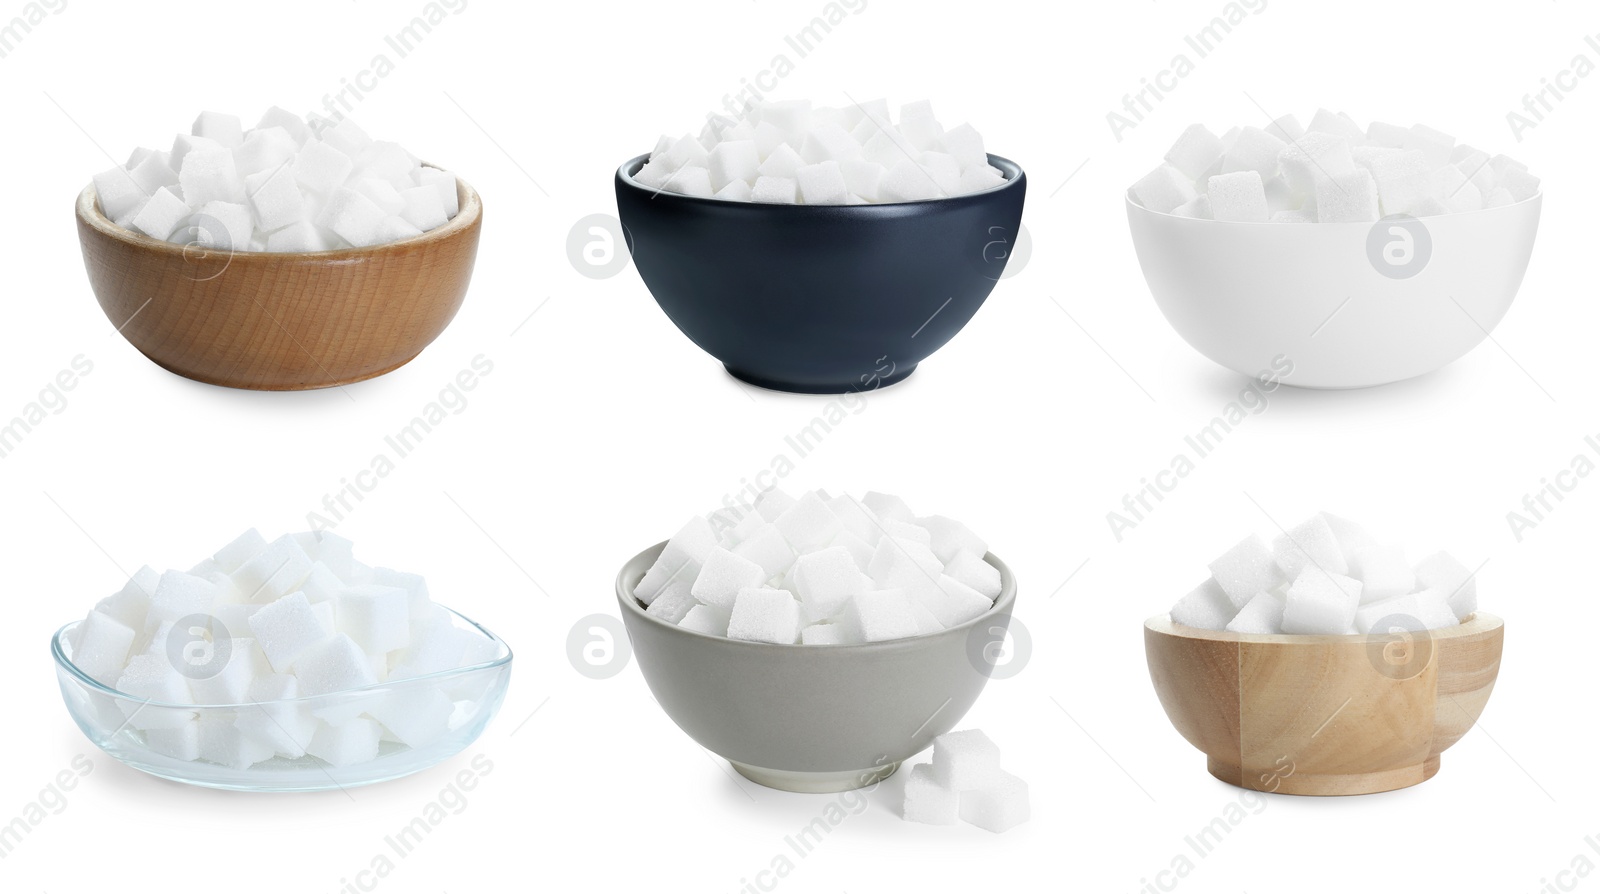 Image of Sugar cubes in bowls isolated on white, set